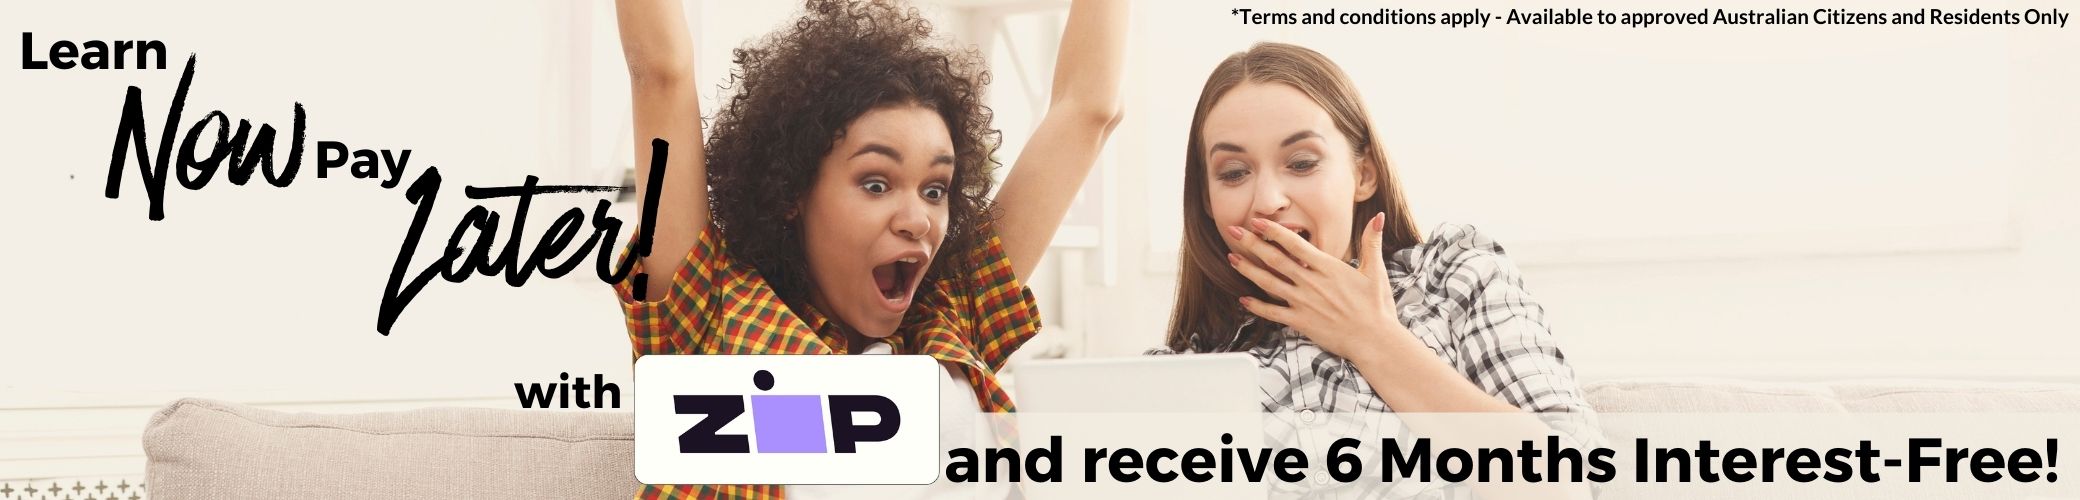 Australian Students can Learn Now Pay Later with Zip